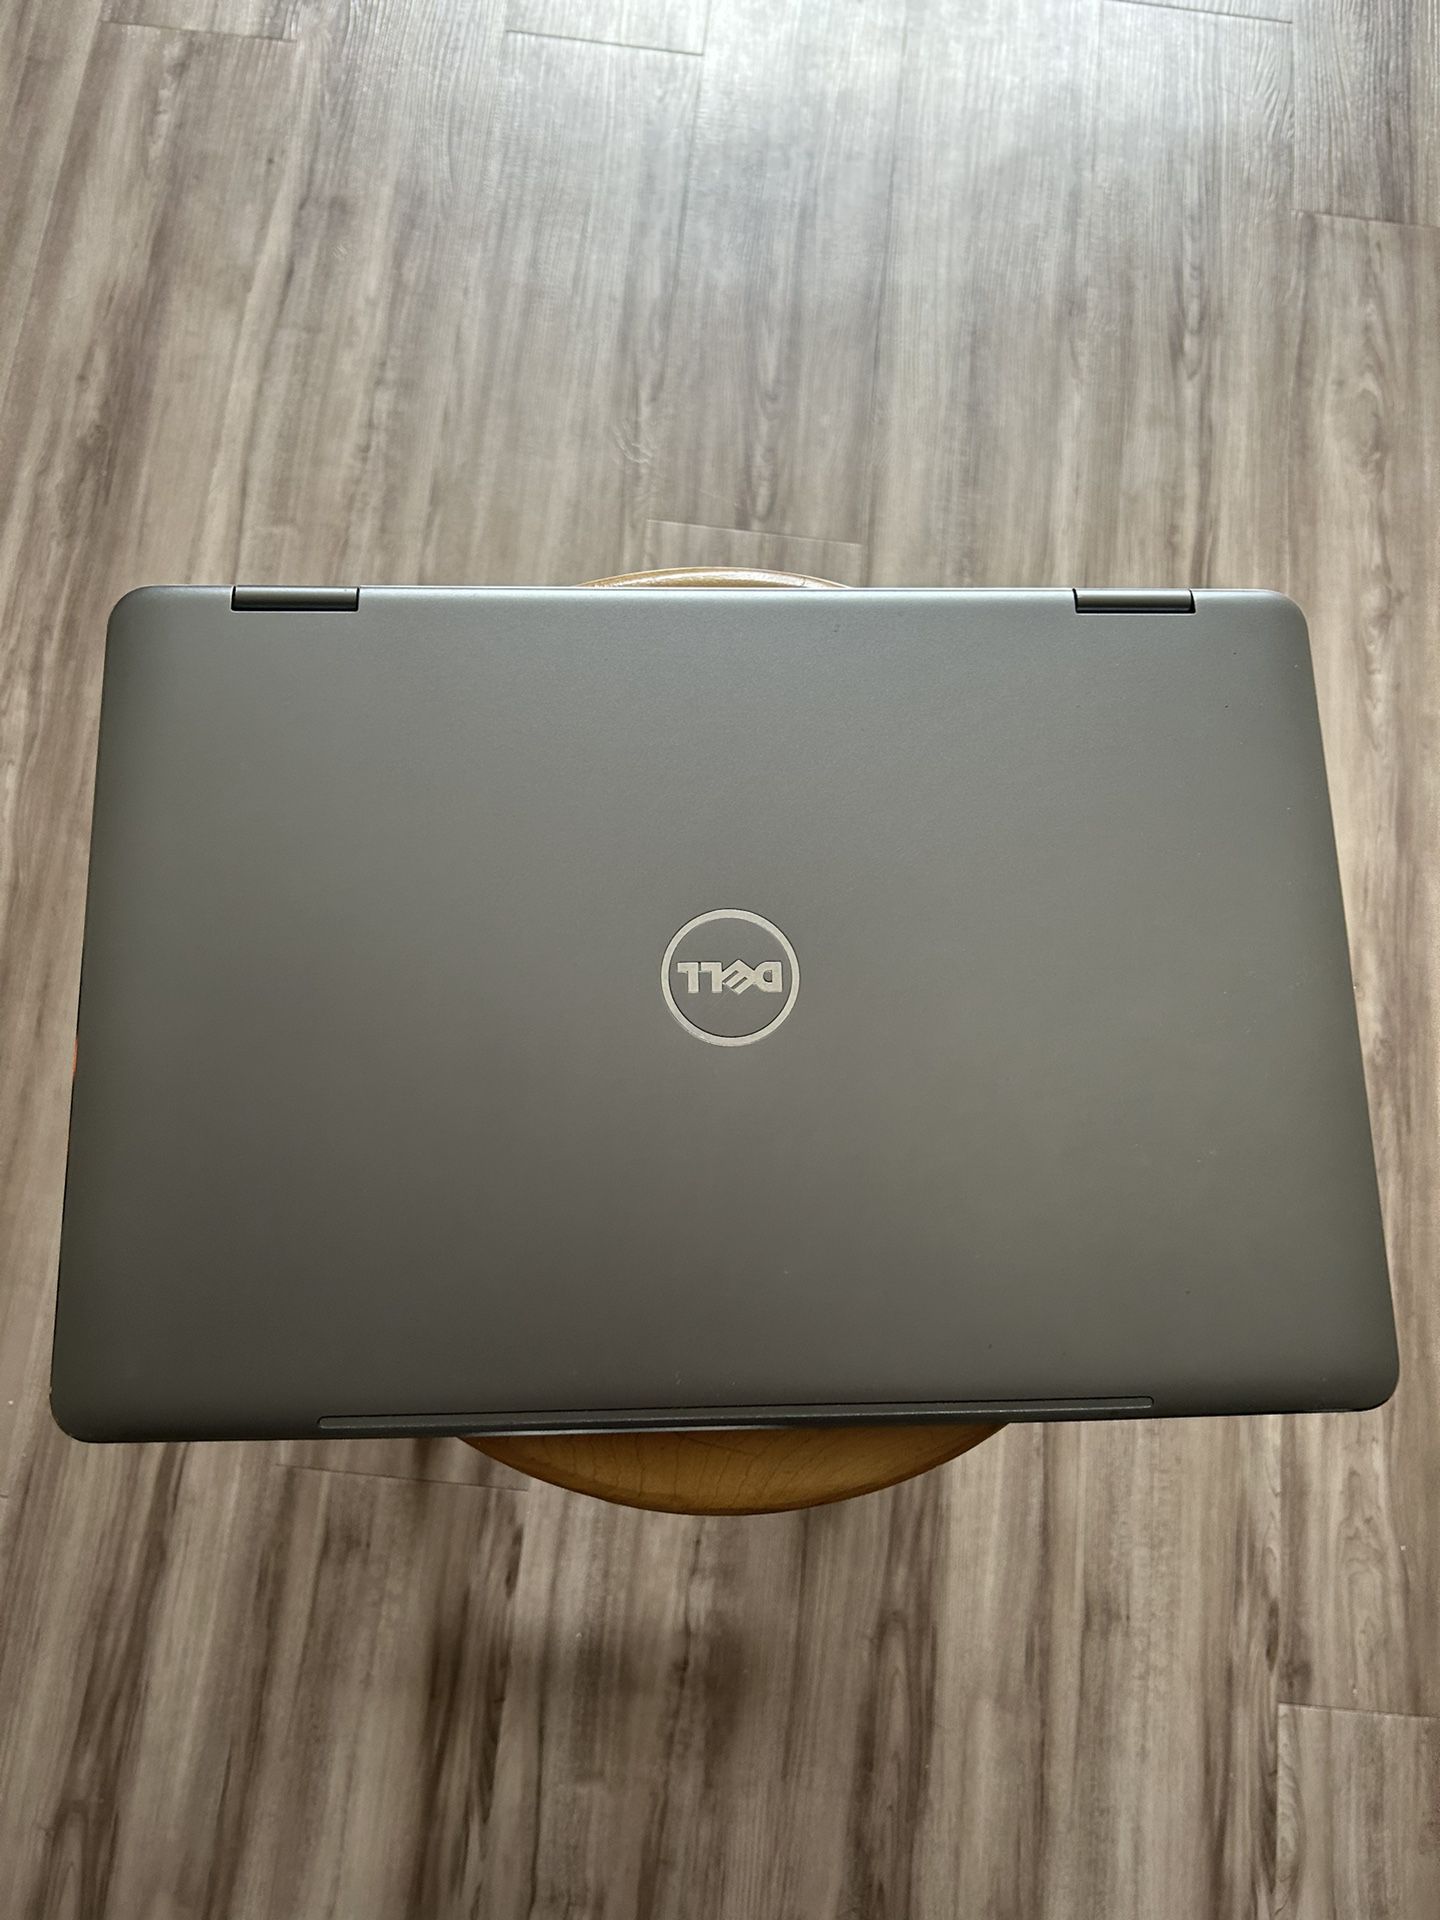 Dell Inspiron 17 7000 Series Laptop 2in1